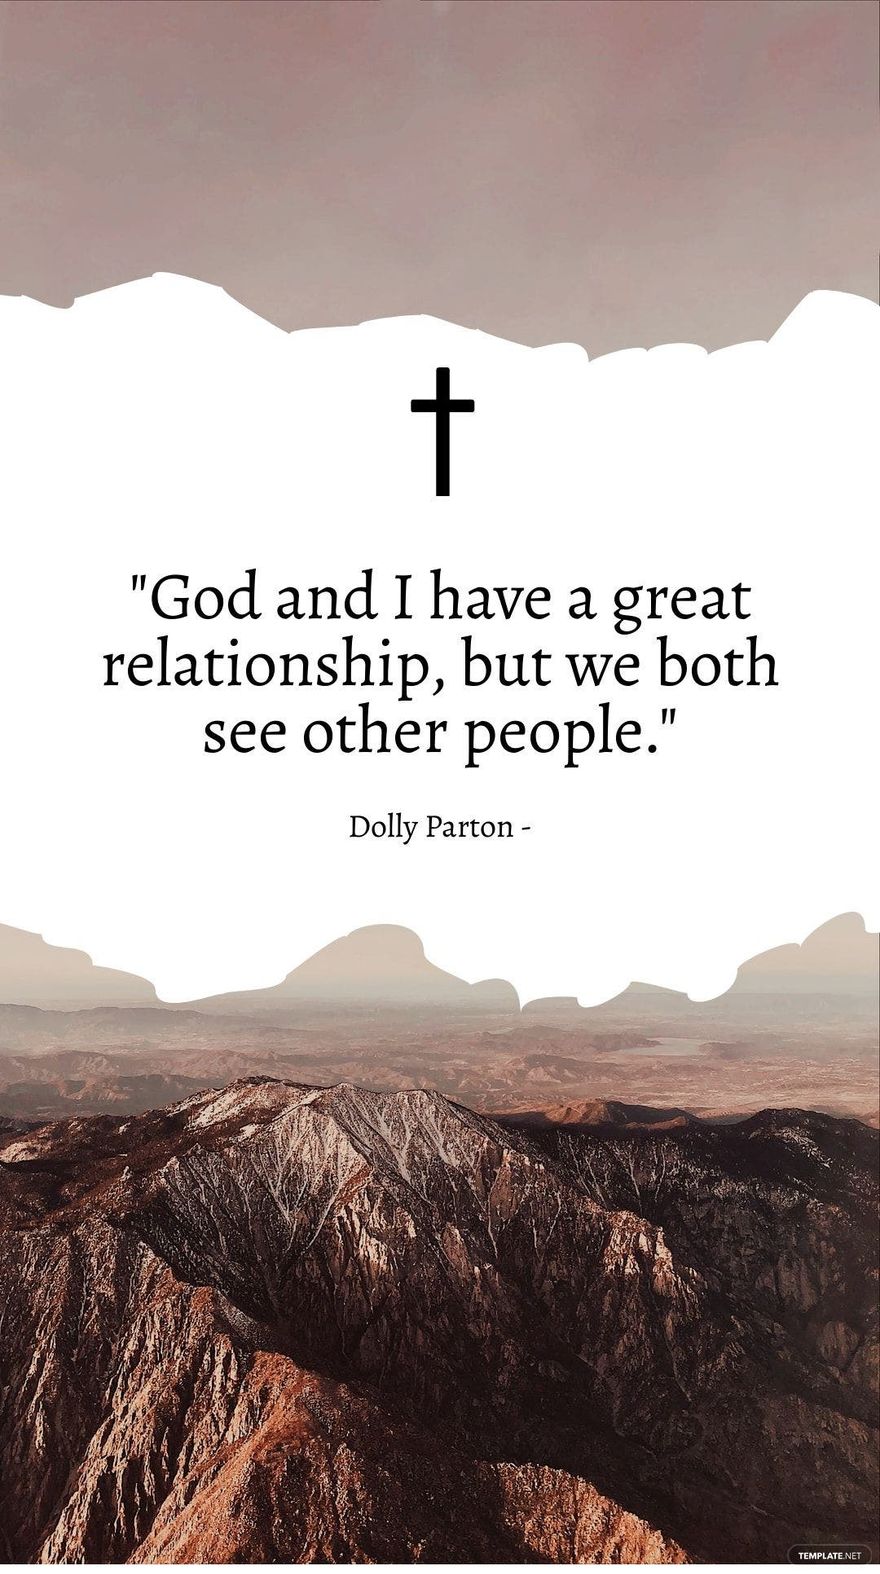 Dolly Parton - God and I have a great relationship, but we both see other people.